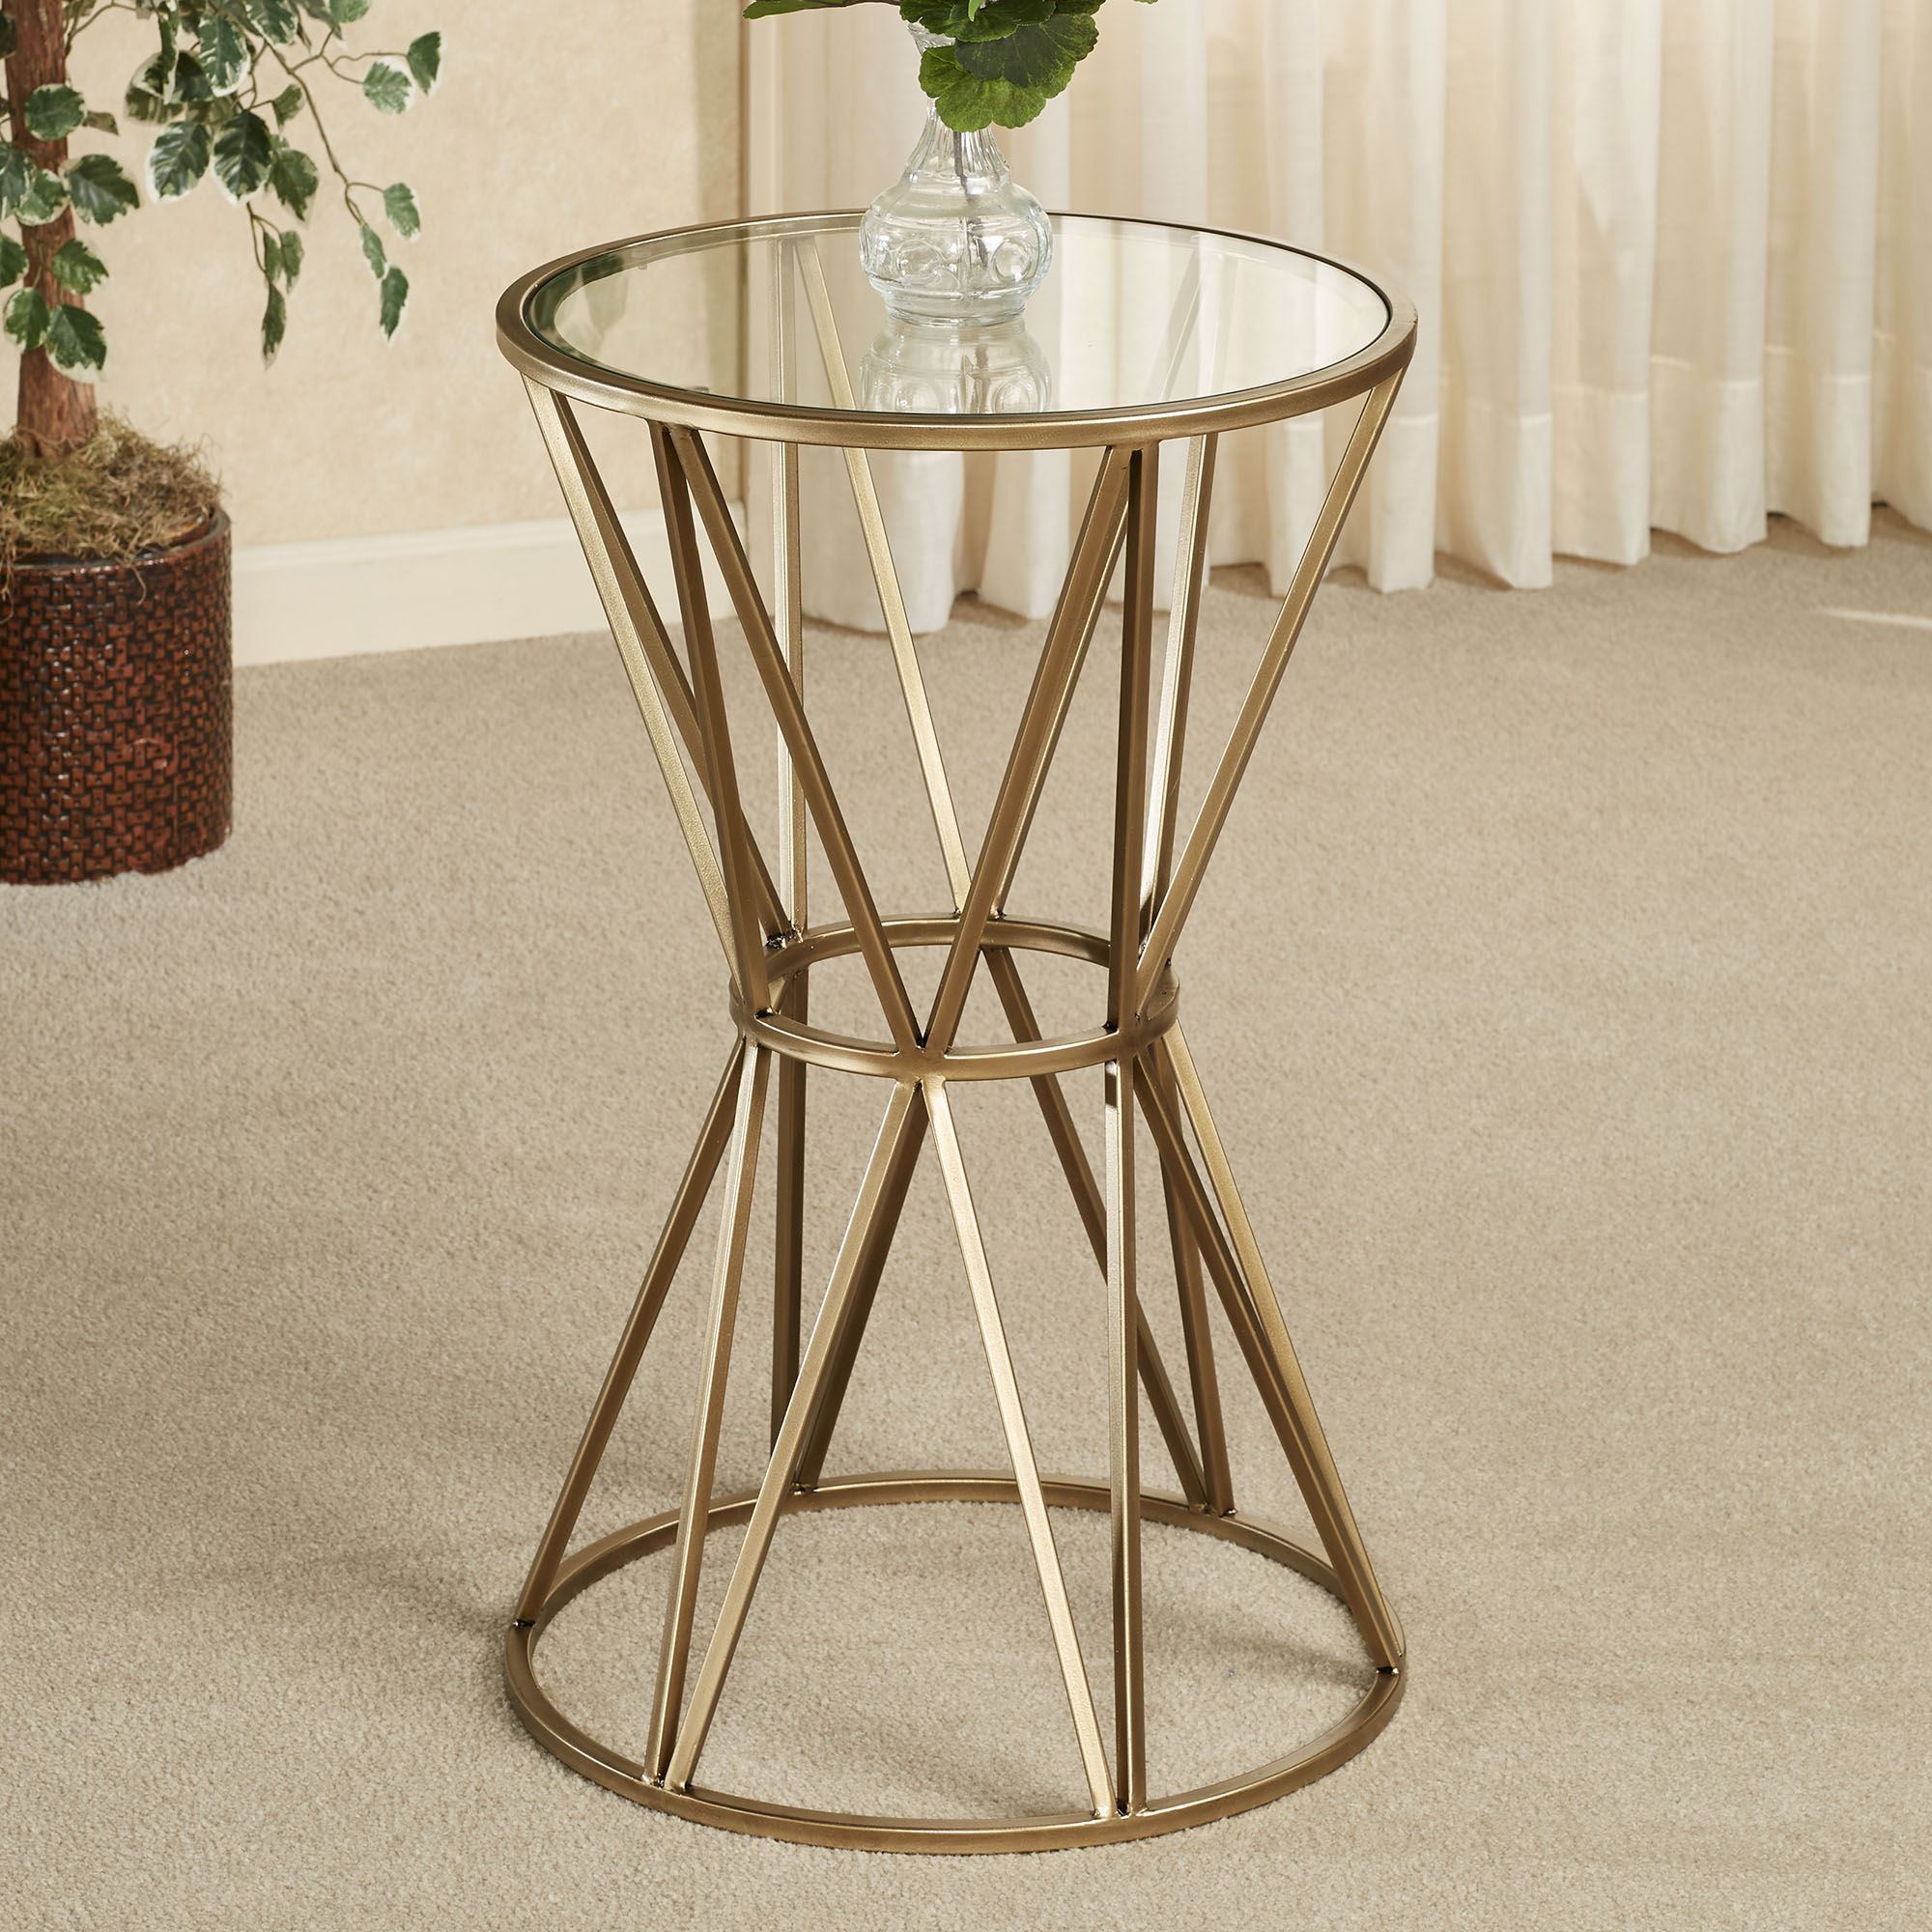 Presley Gold Metal Round Accent Table Regarding Cream And Gold Console Tables (View 4 of 20)